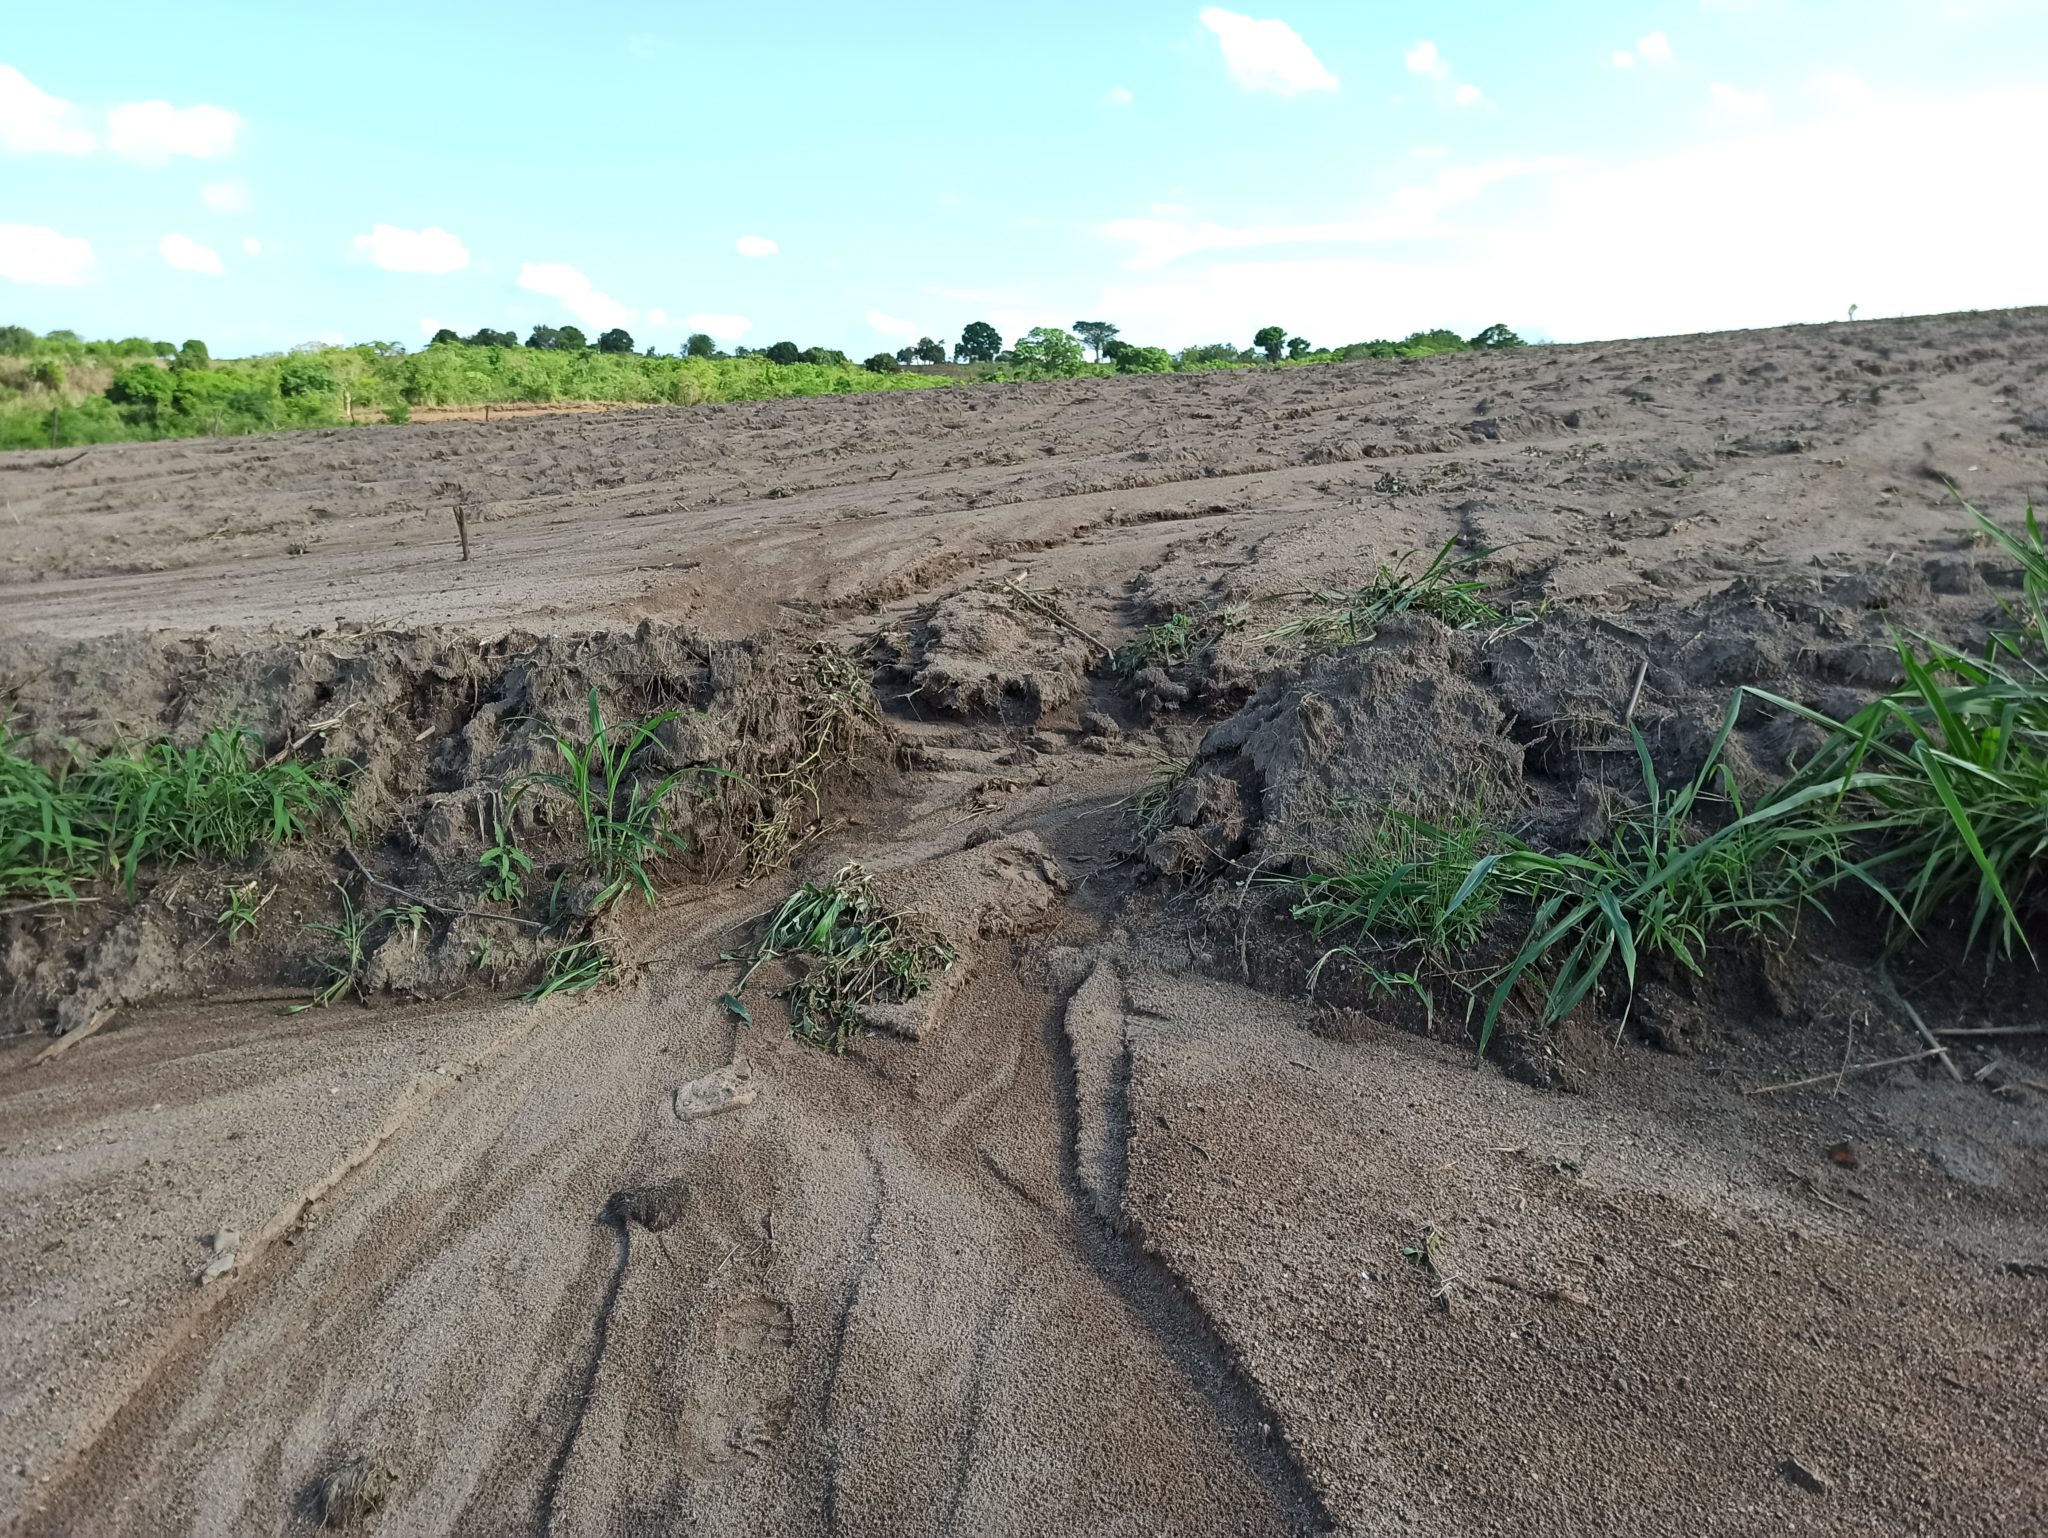 A field shows signs of erosion from water